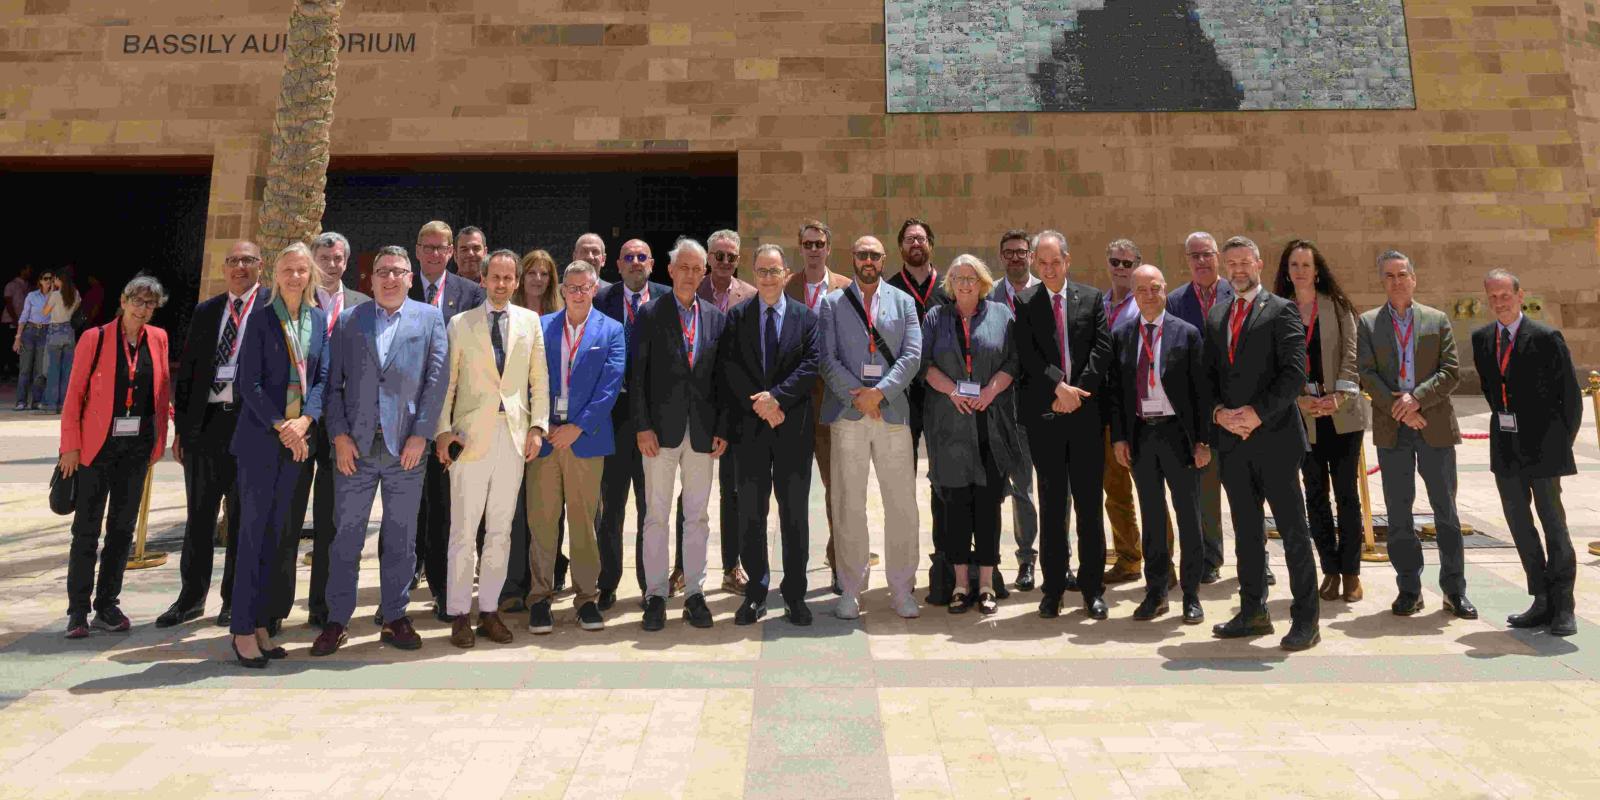 A group photo of visiting AAICU leaders standing in front of Bassily Auditorium at AUC New Cairo Campus